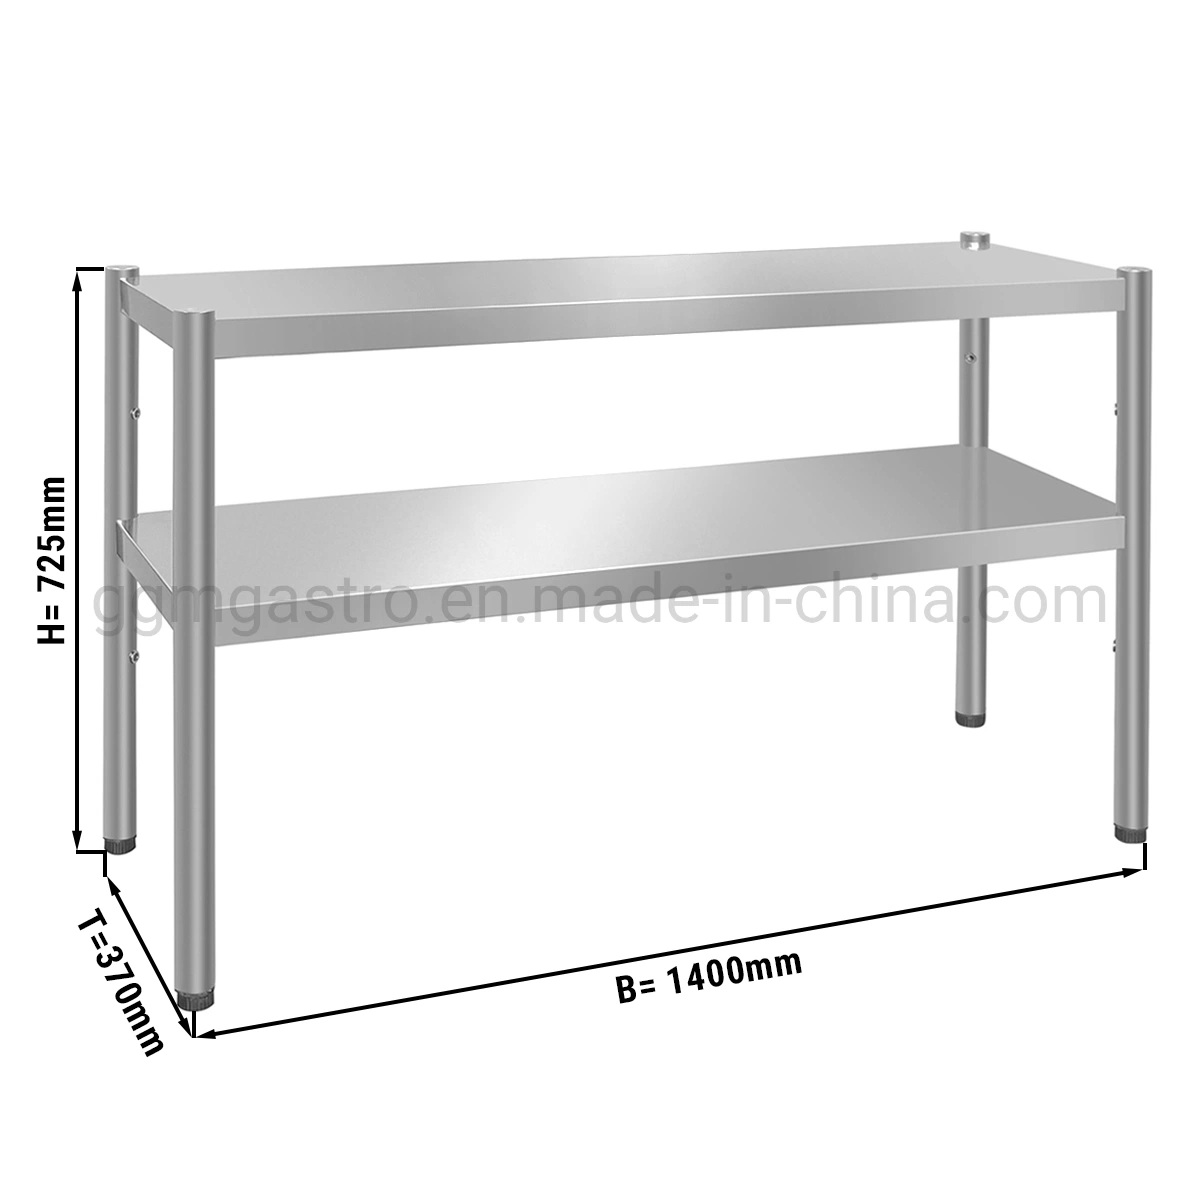 OEM Commercial Kitchen Furniture Stainless Steel Kitchen Top Shelf with 2 Floors